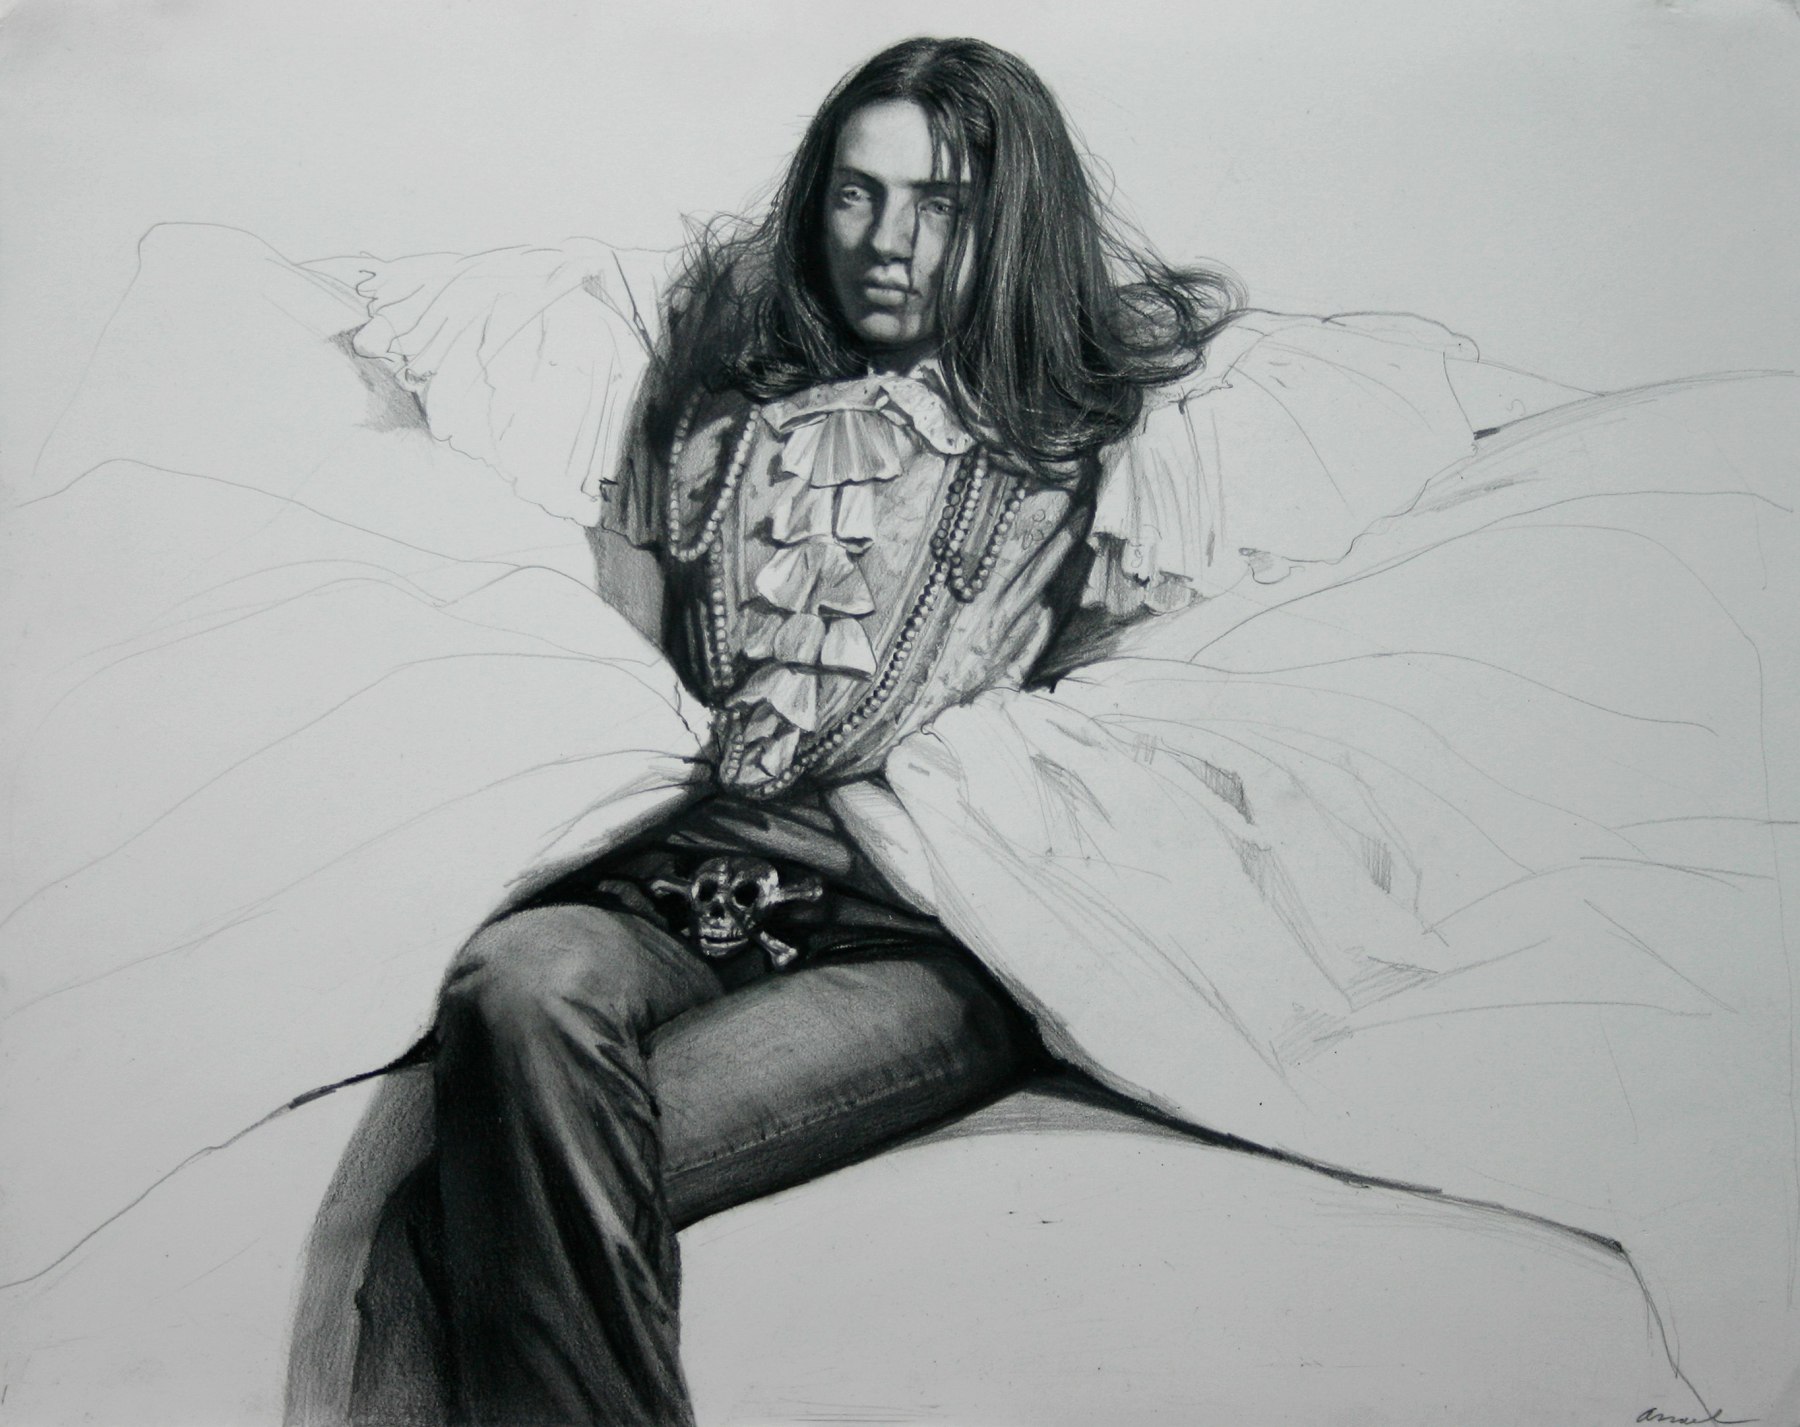 Steven Assael, Girl with Ruffled Shirt (SOLD), 2008, crayon and graphite on paper, 12 5/8 x 15 3/4 inches